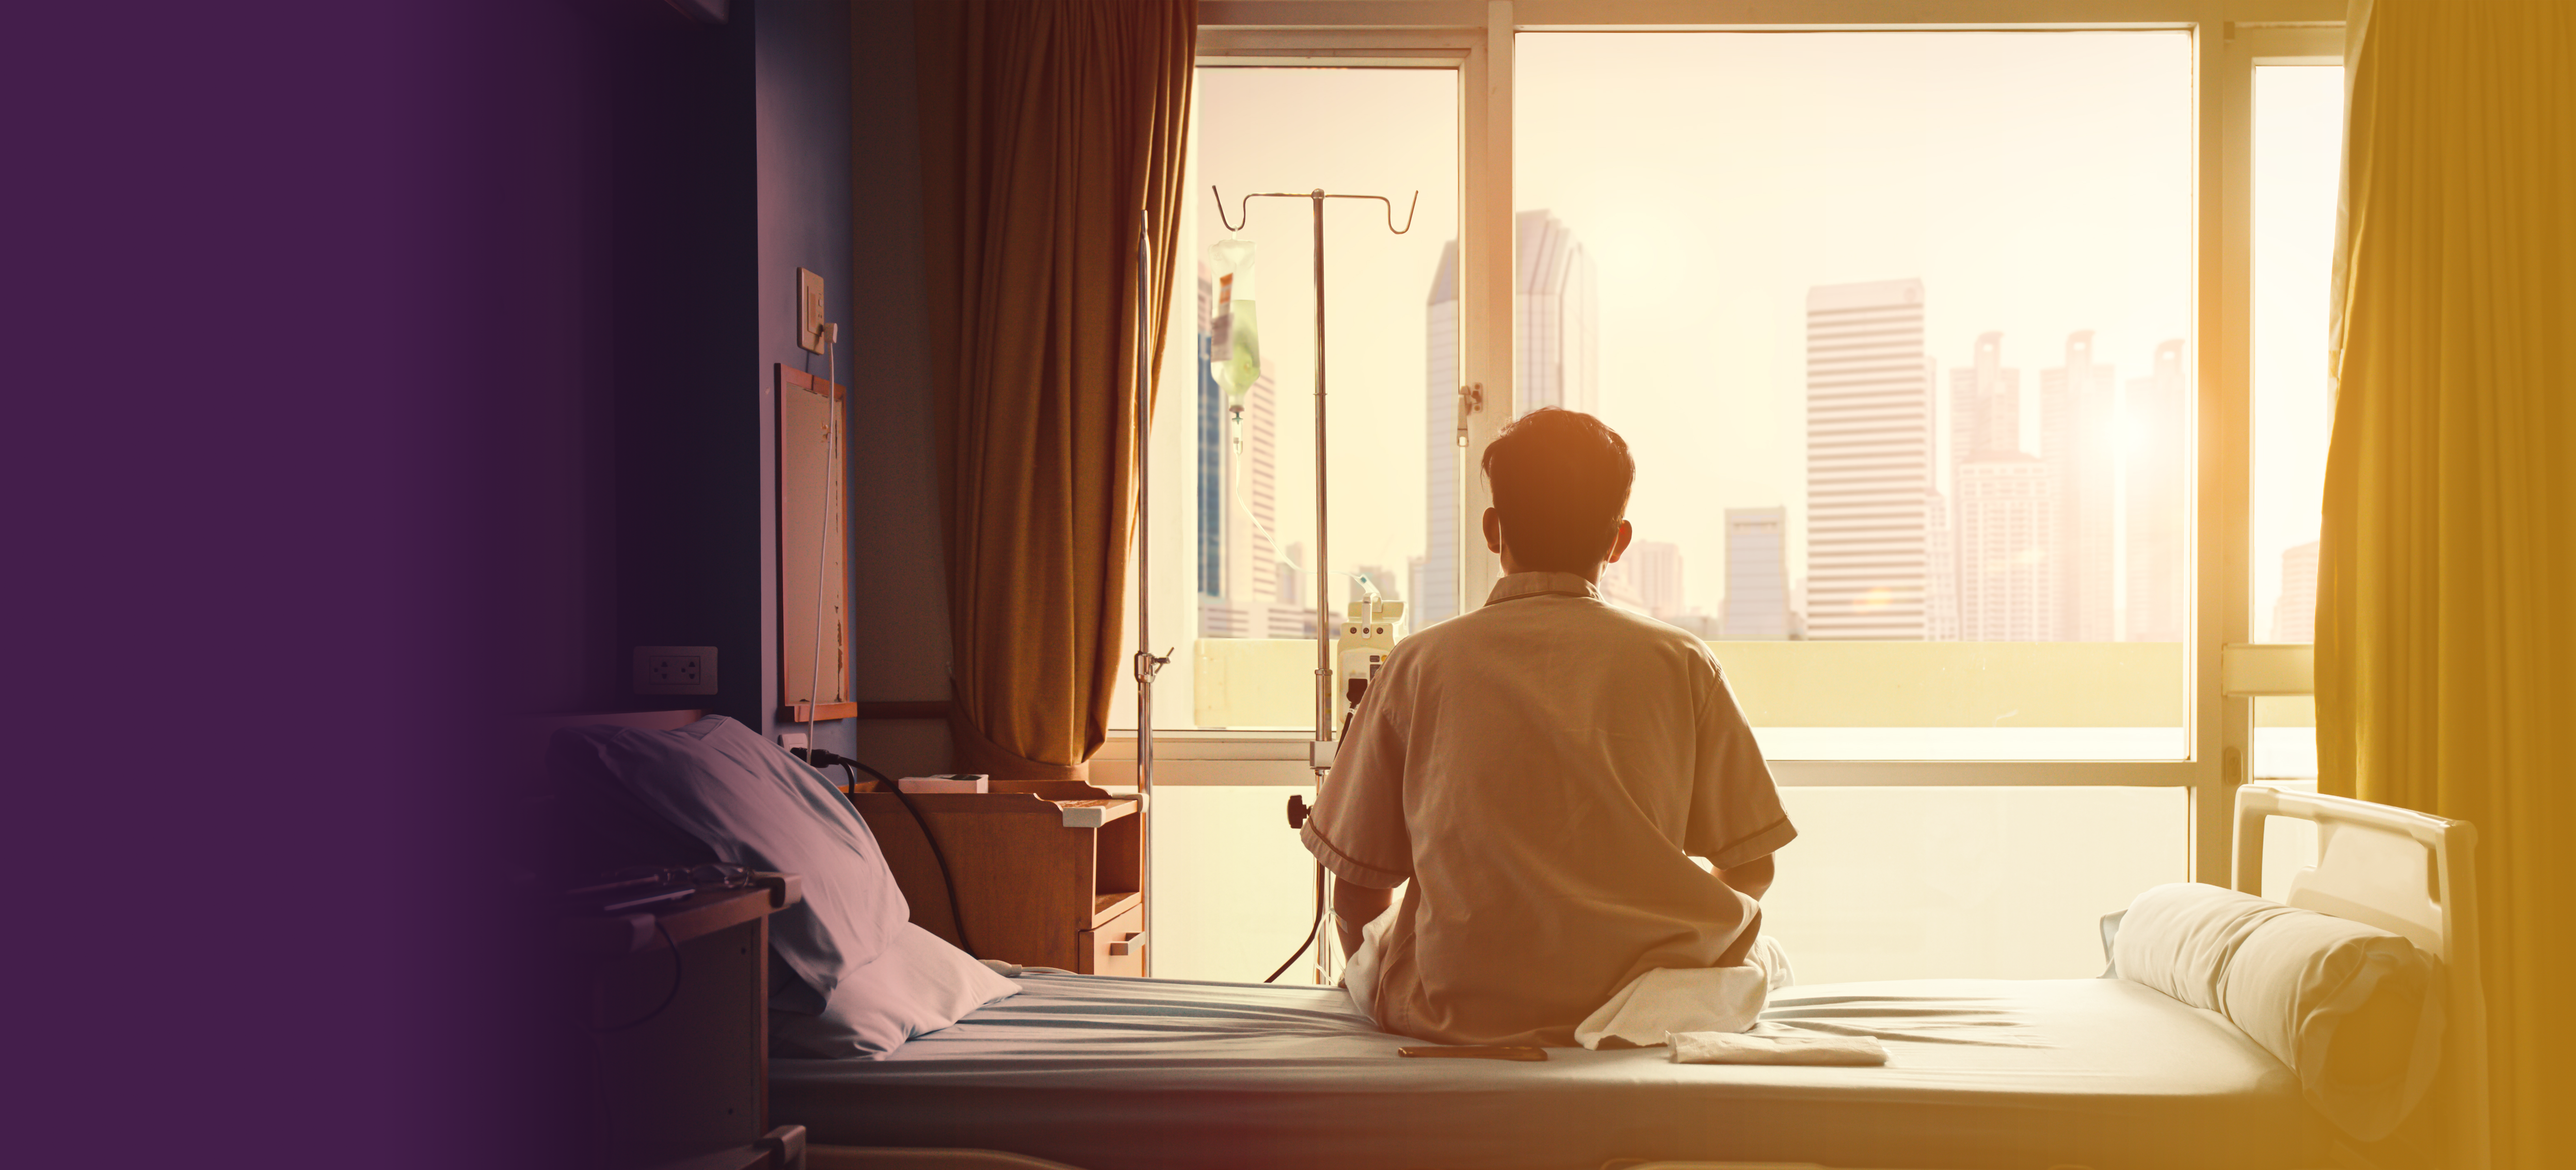 Individual seated on a psychiatric hospital bed, looking out the window. Symbolic image representing the pressing issue of psychiatric inpatient bed shortages in America